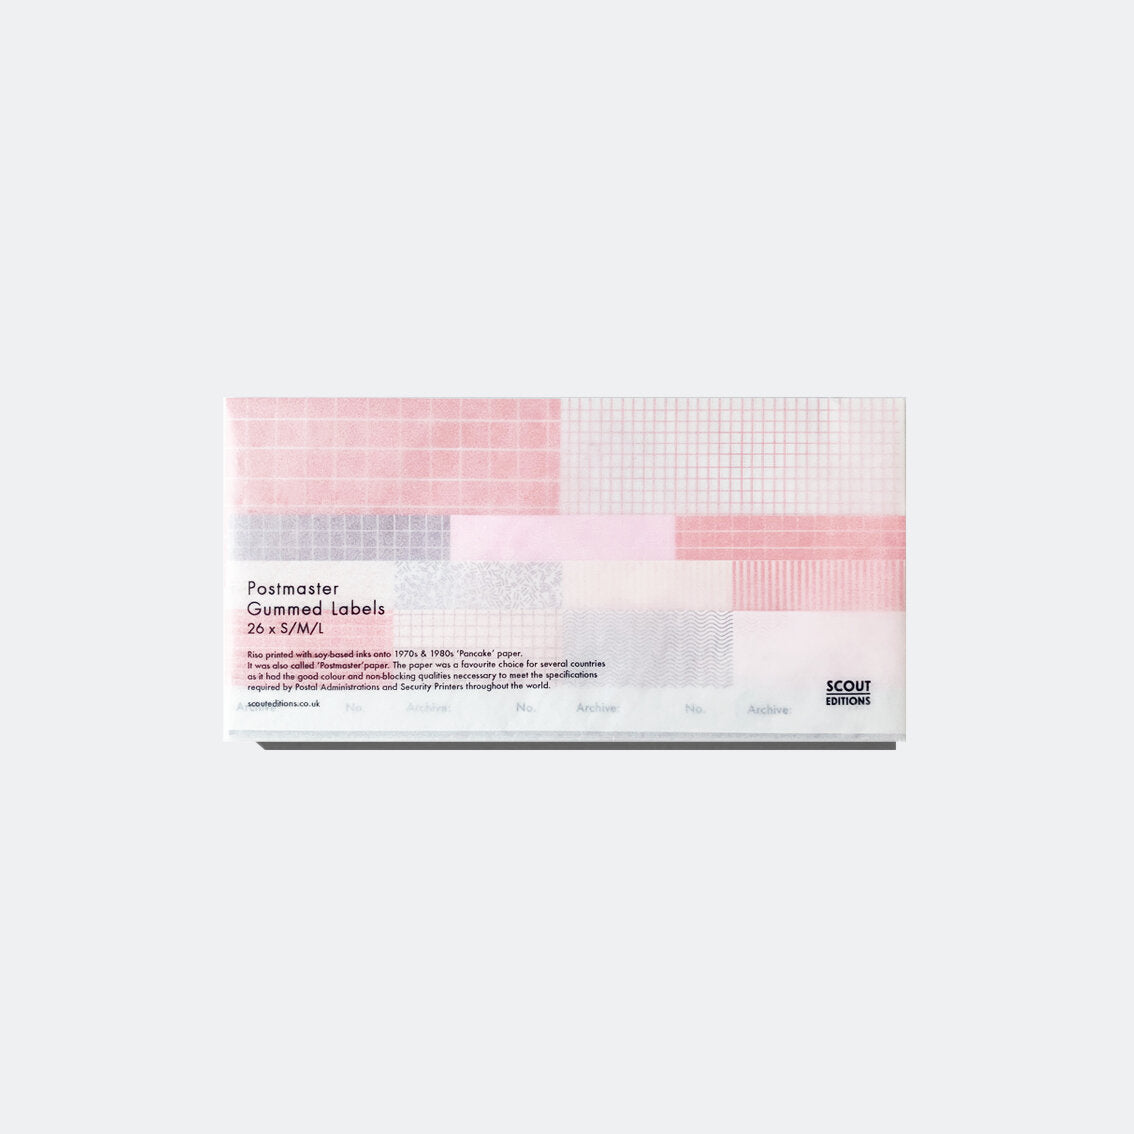 Archive Gummed Labels in Red and Pink